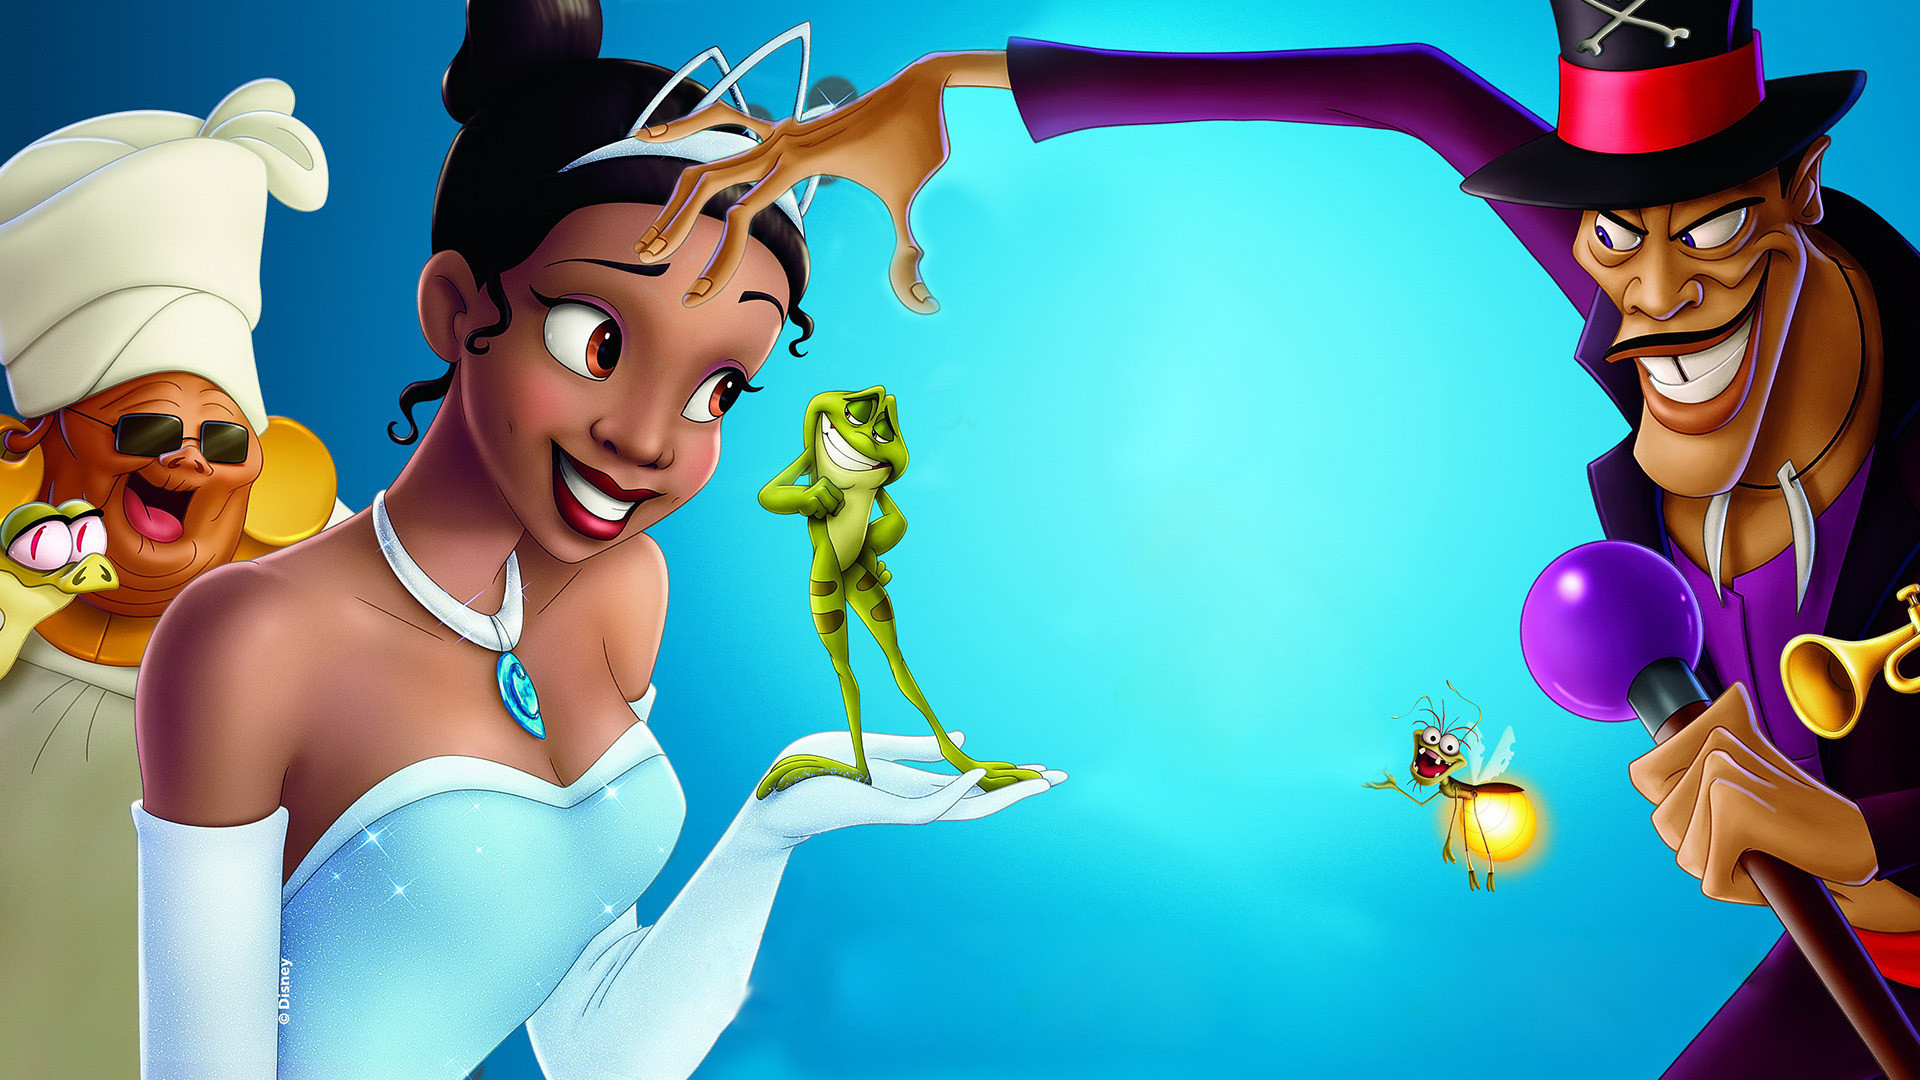 Princess and the Frog 3 Wallpapers HD Wallpapers 1920x1080